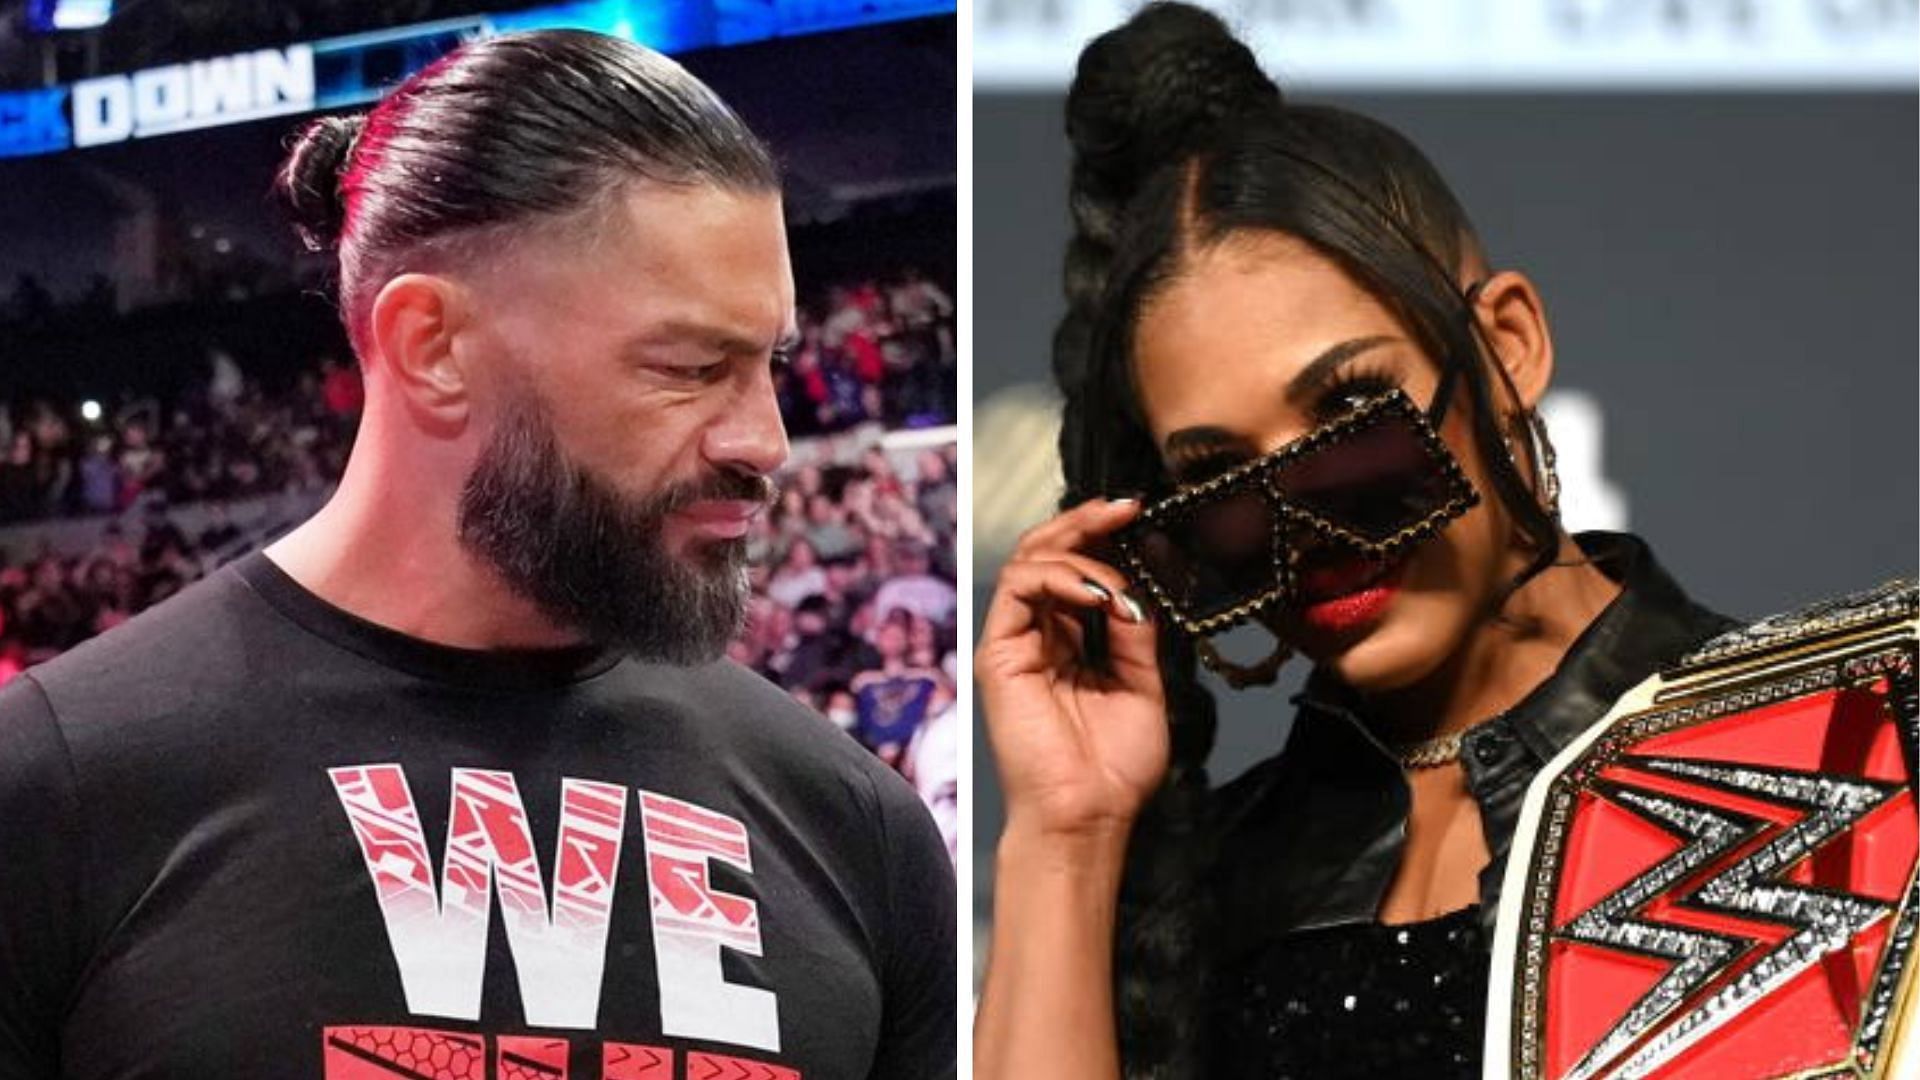 Roman Reigns and Bianca Belair are two of WWE